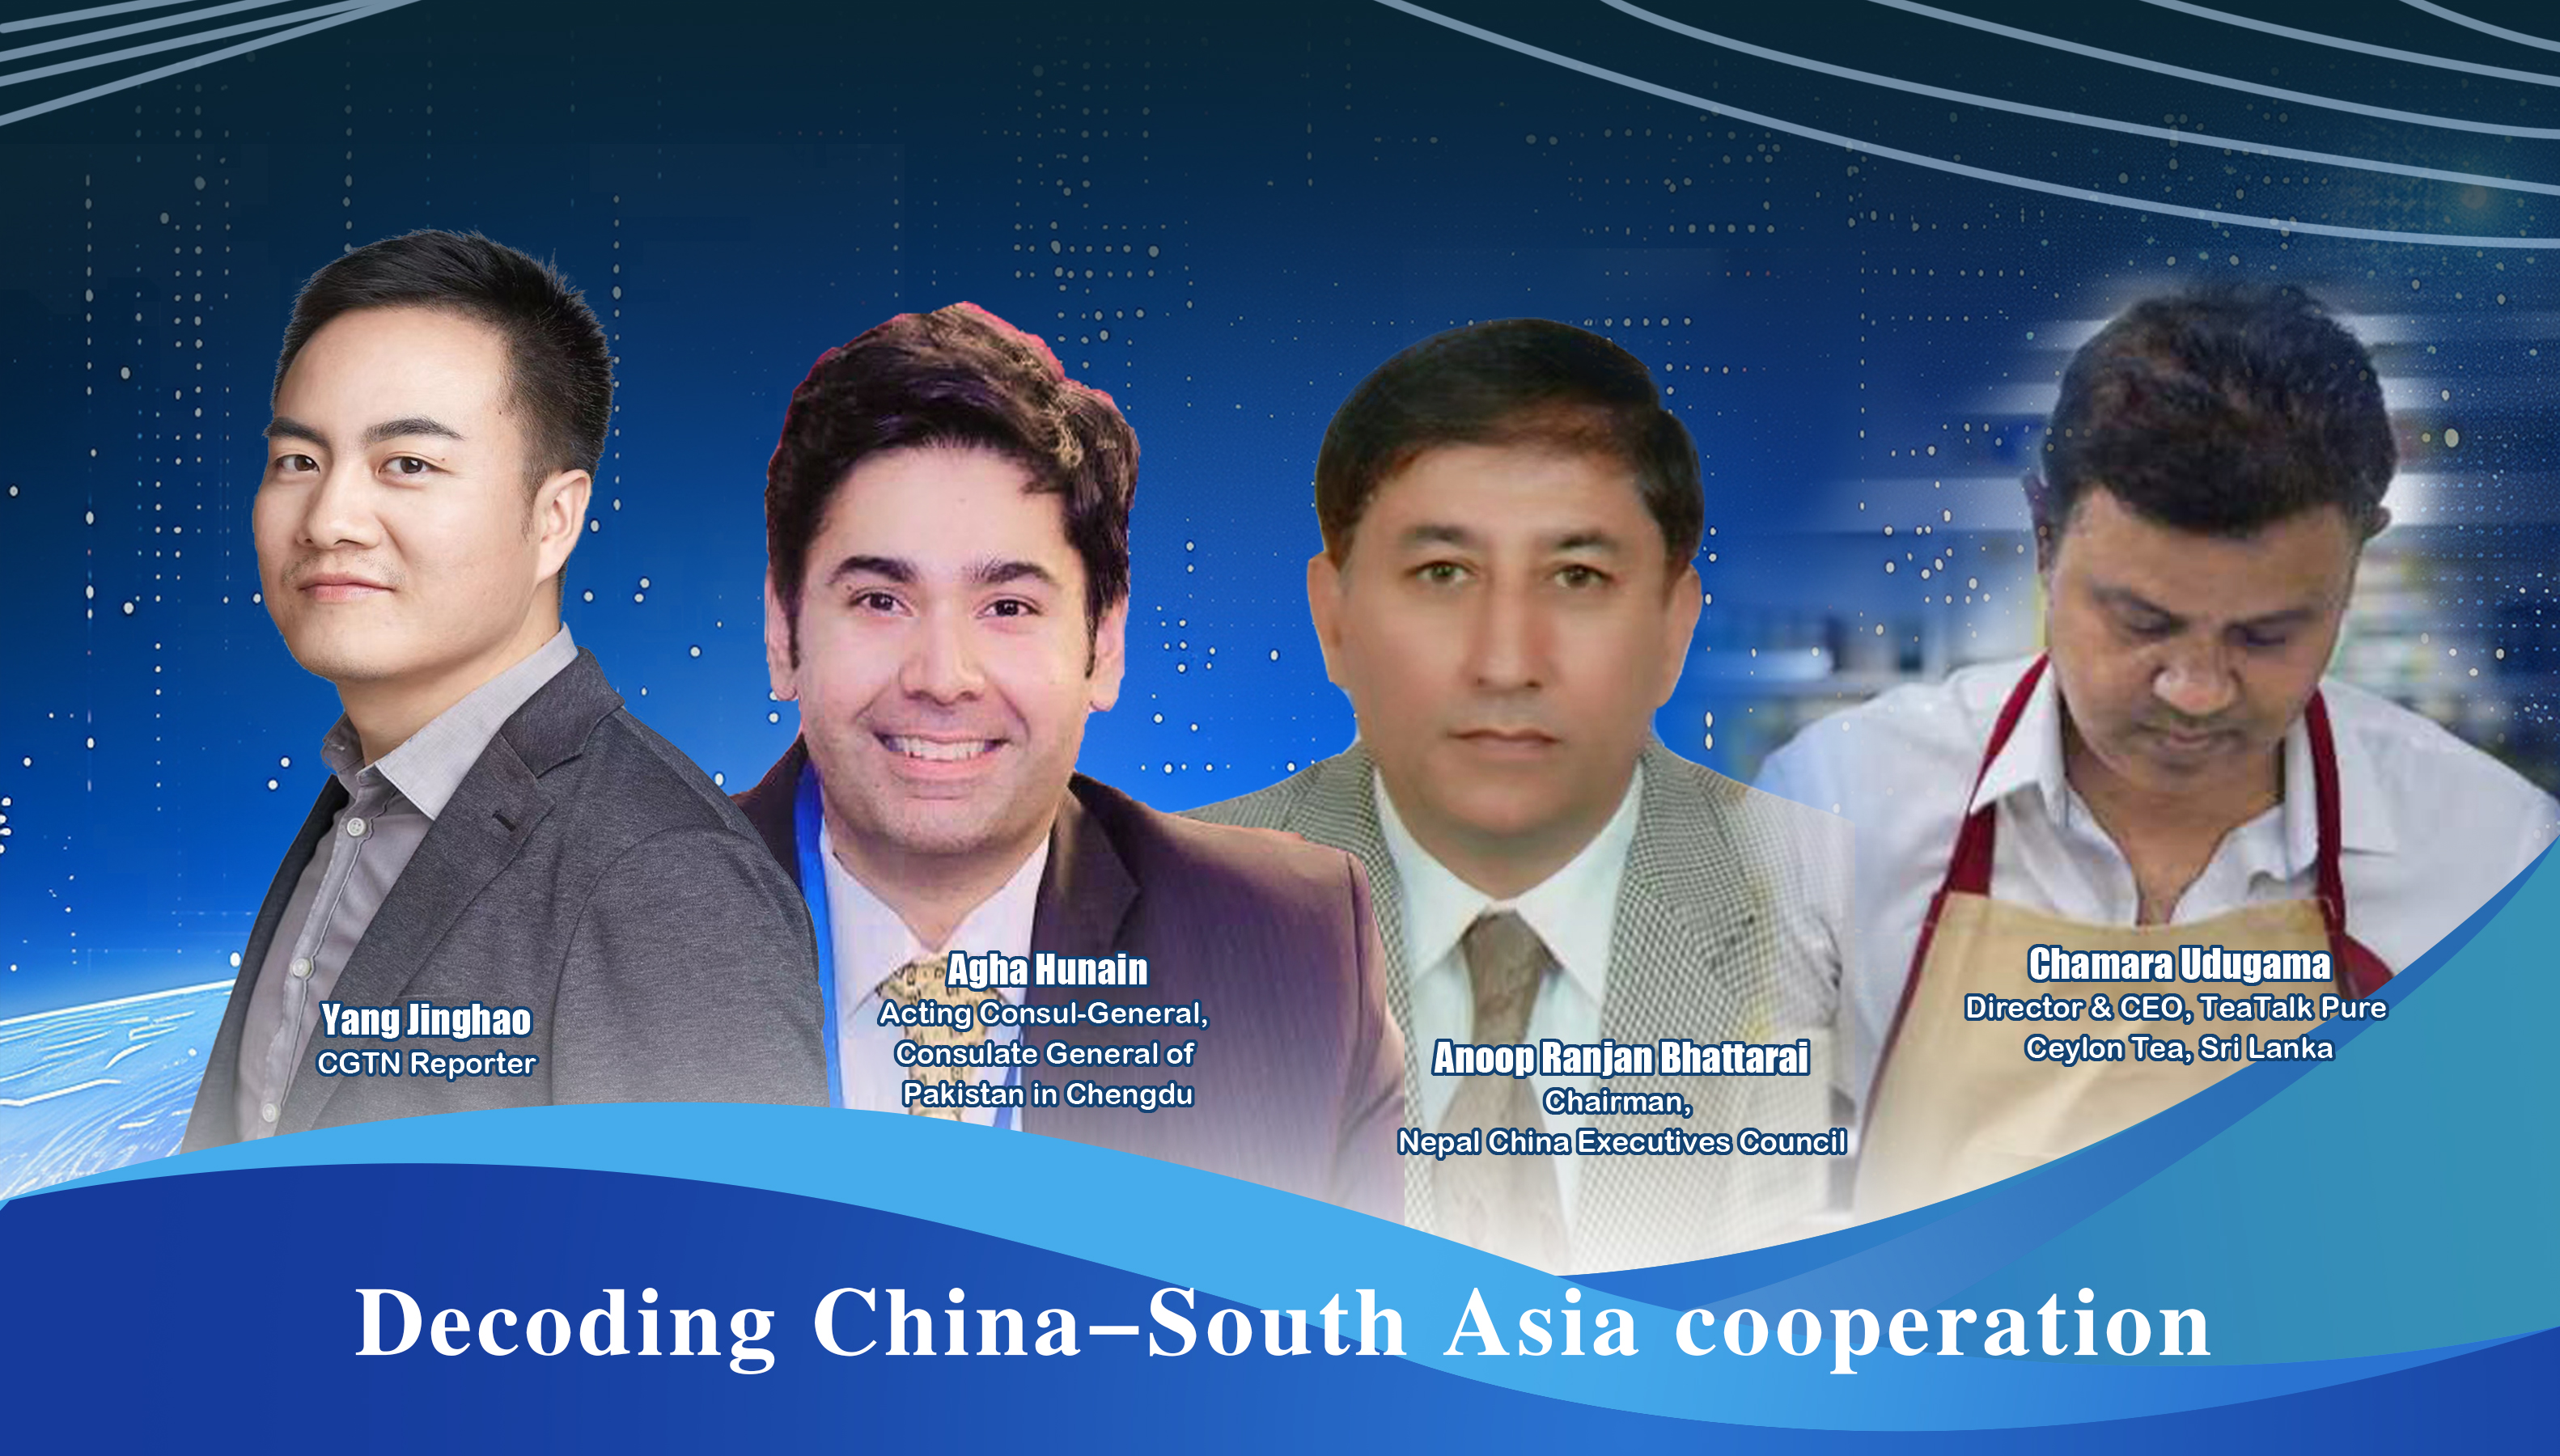 Live: Decoding China-South Asia cooperation 